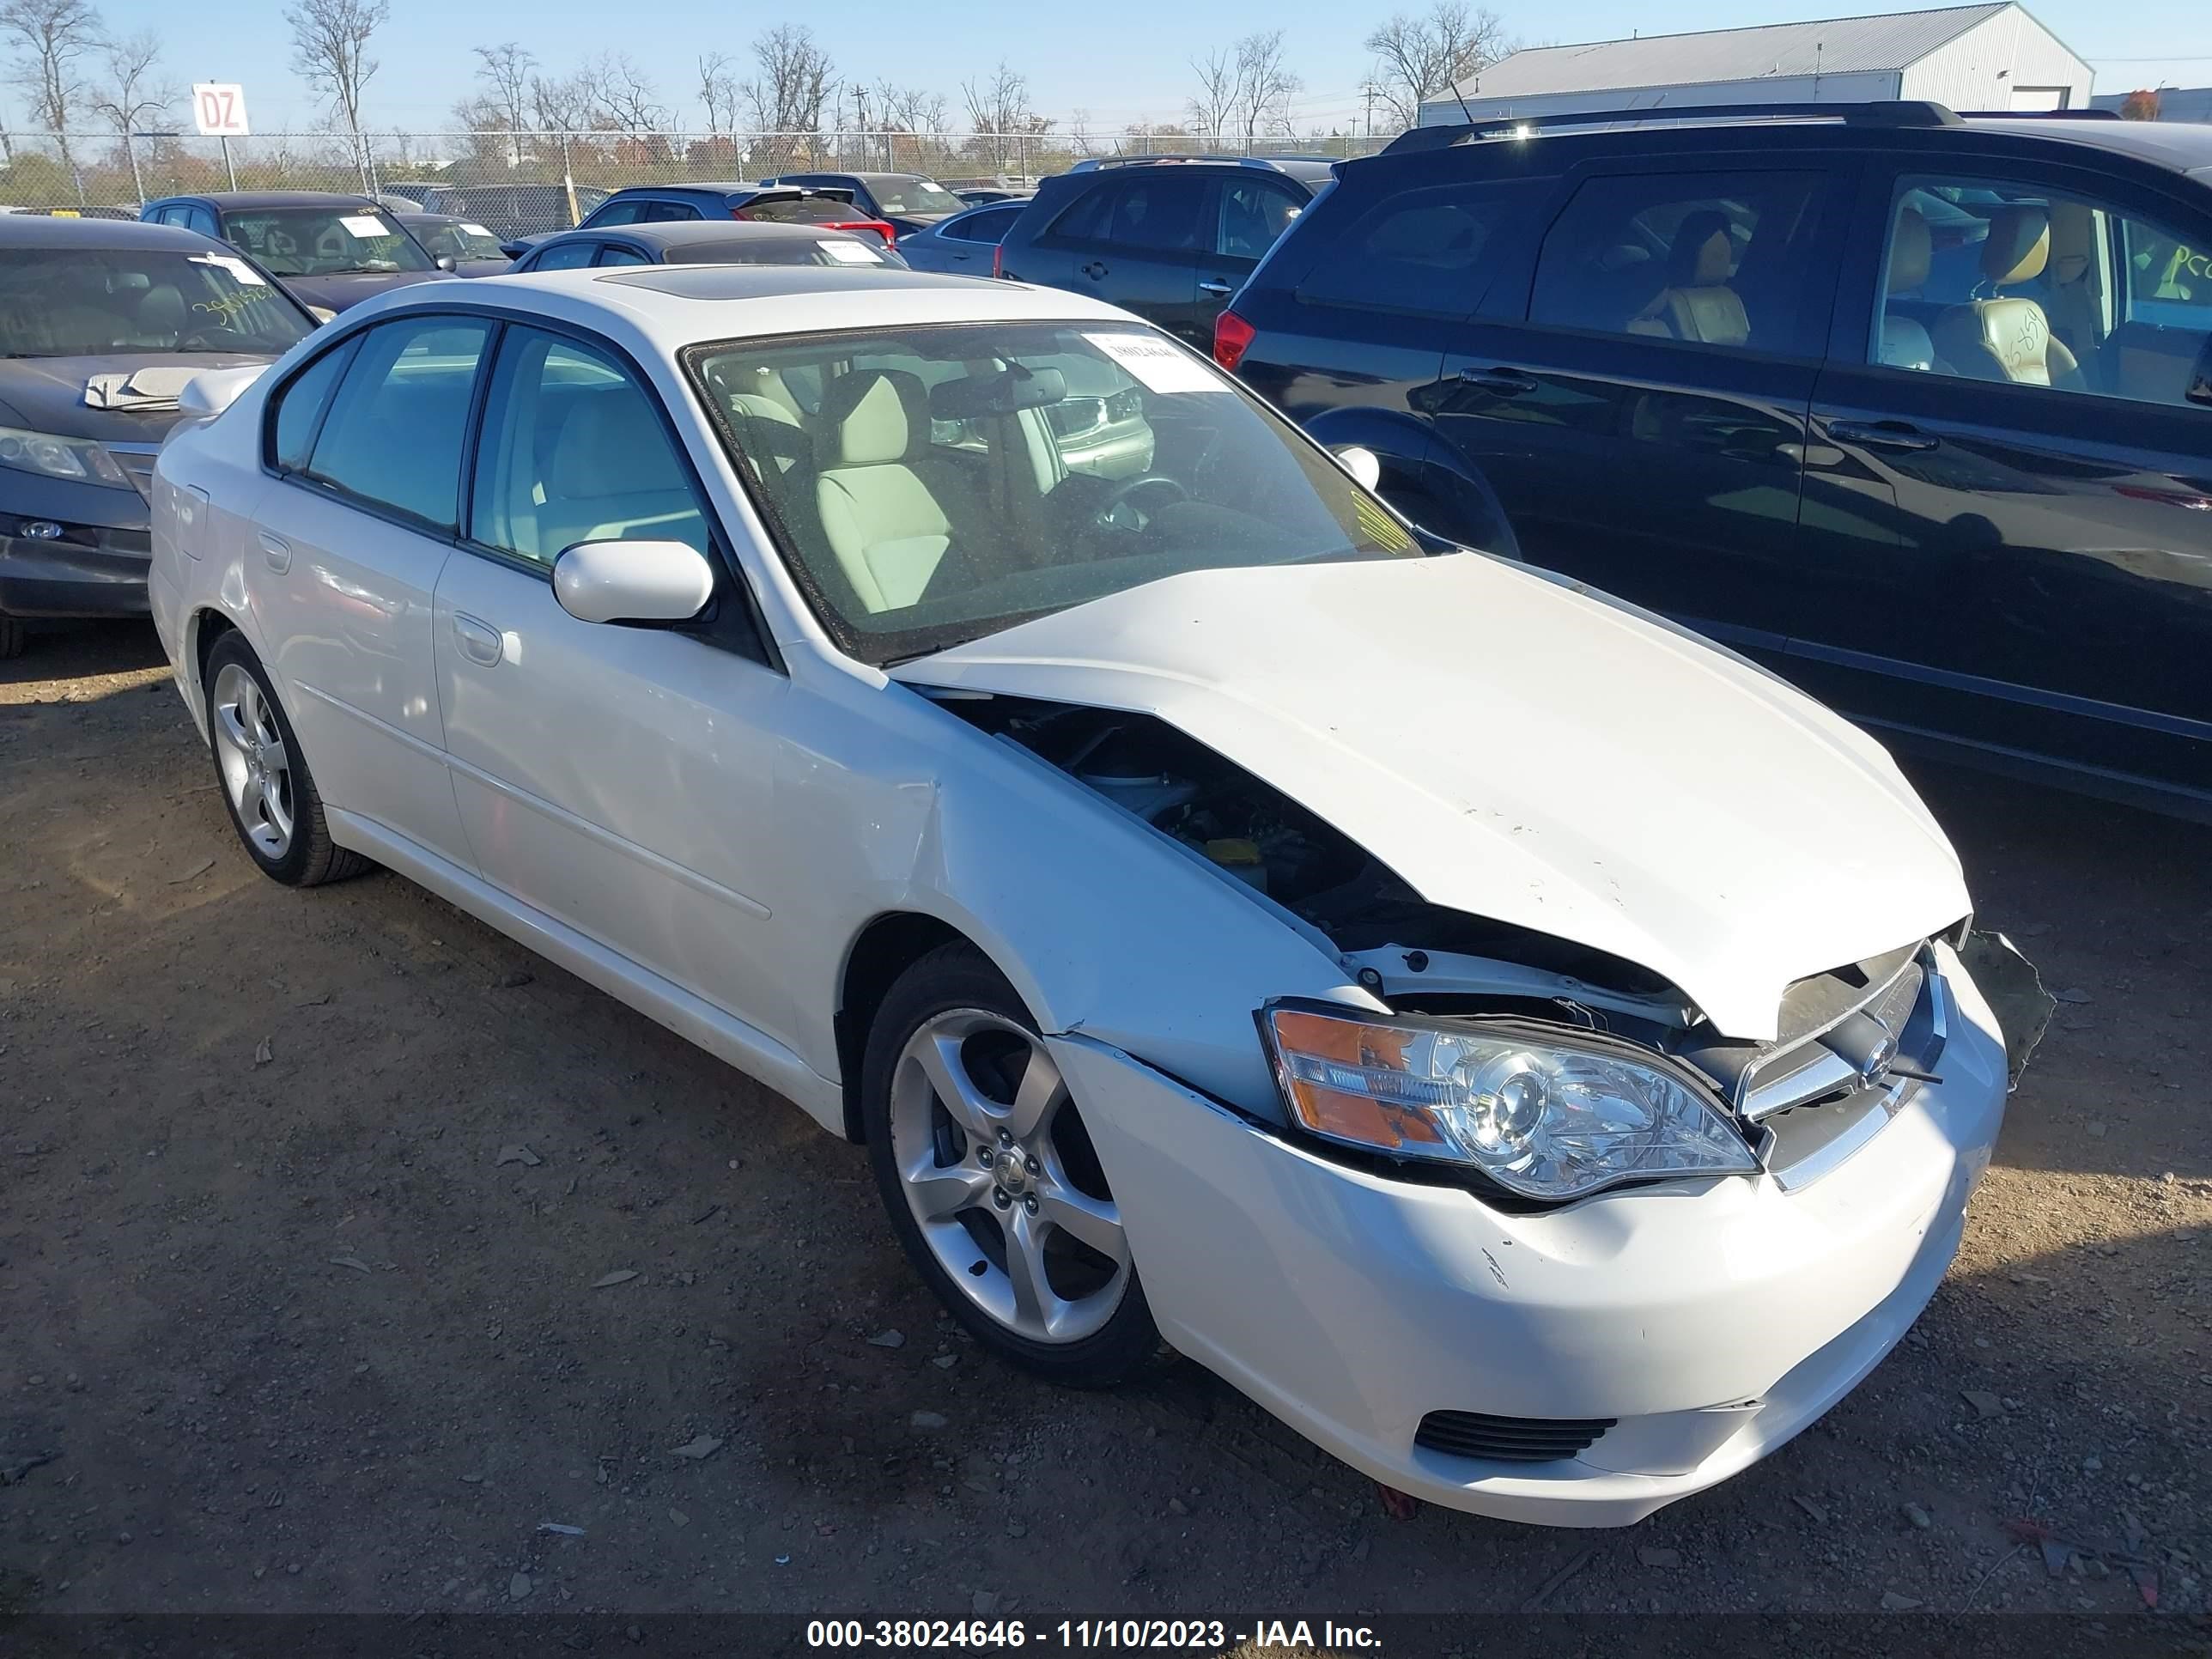 vin: 4S3BL616077209780 4S3BL616077209780 2007 subaru legacy 2500 for Sale in 45069, 10100 Windisch Rd, West Chester, USA